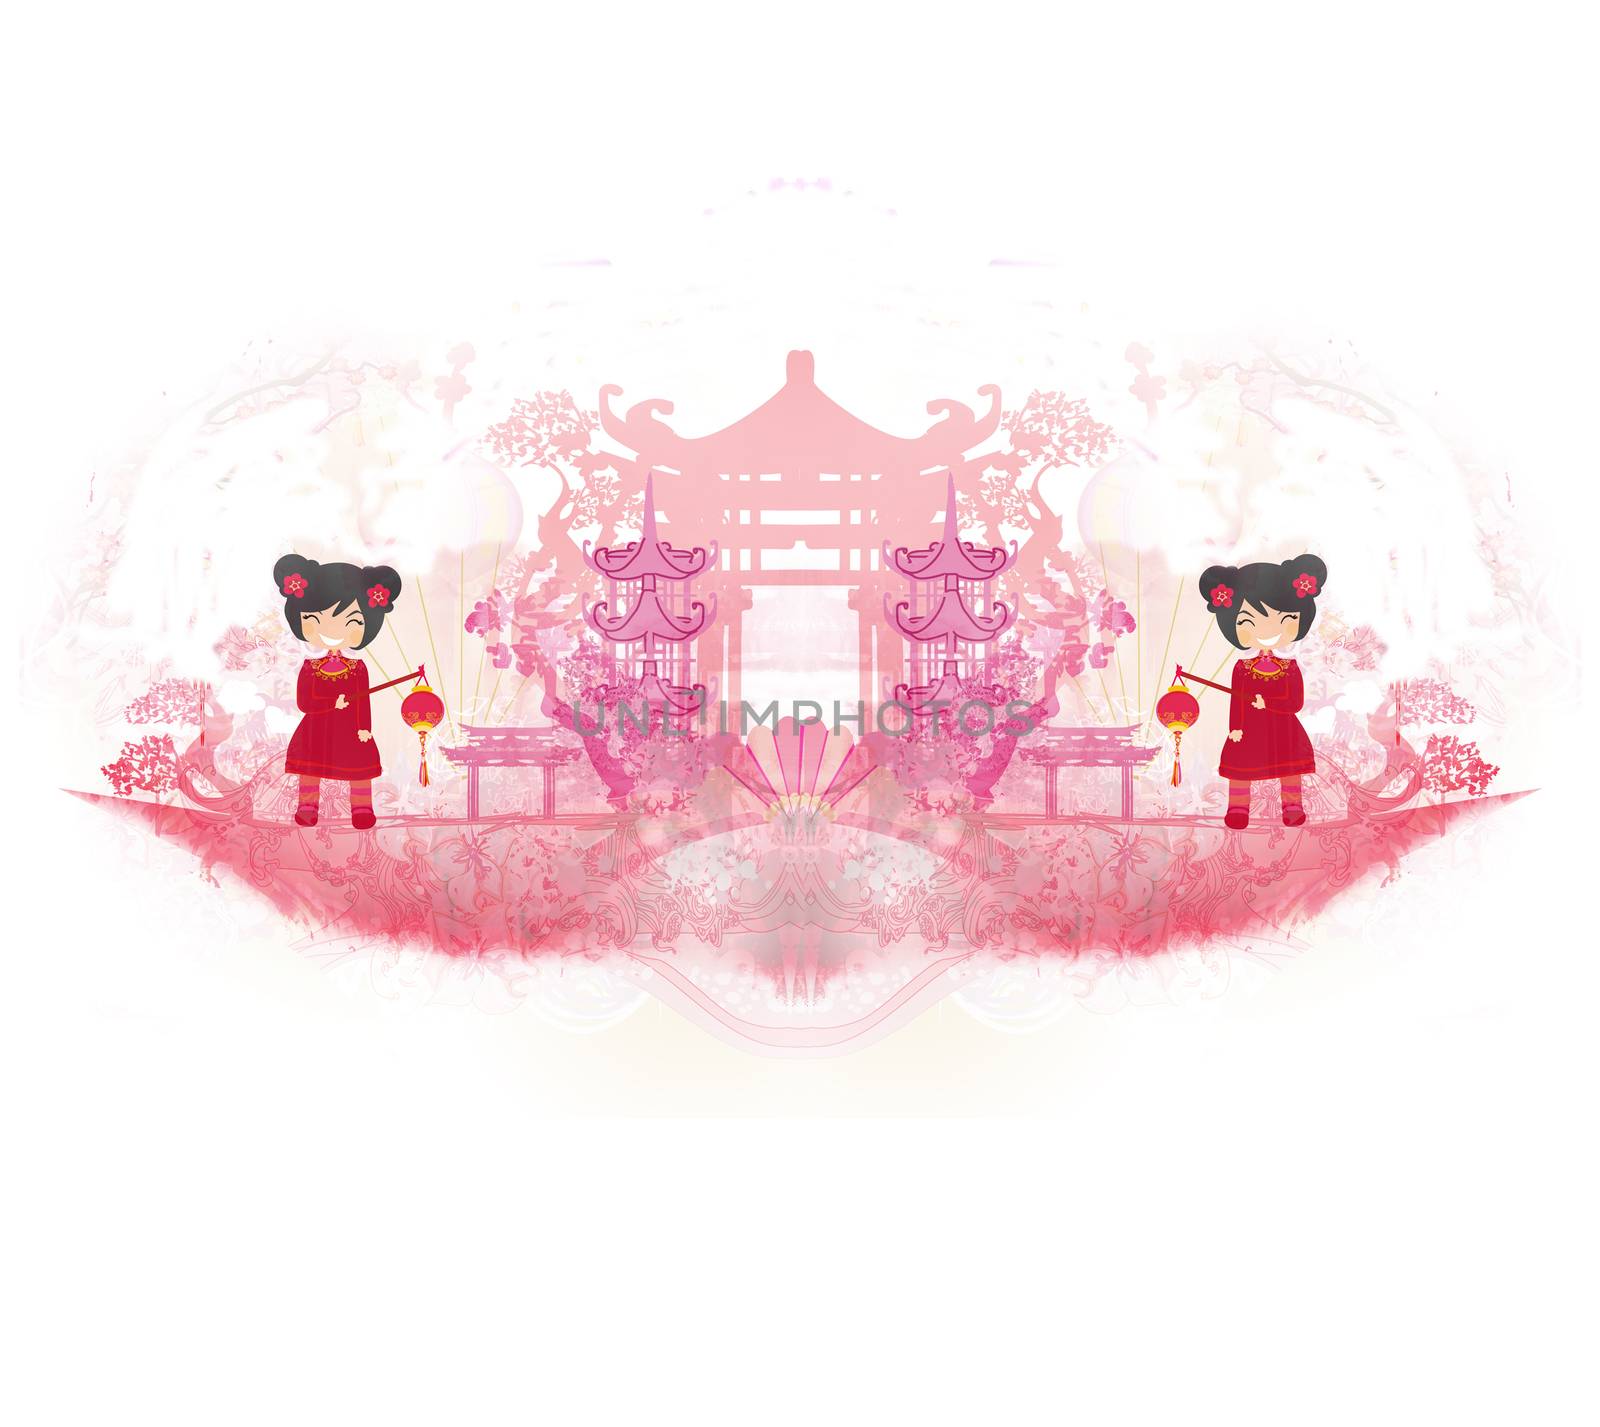 Mid-Autumn Festival for Chinese New Year - card by JackyBrown